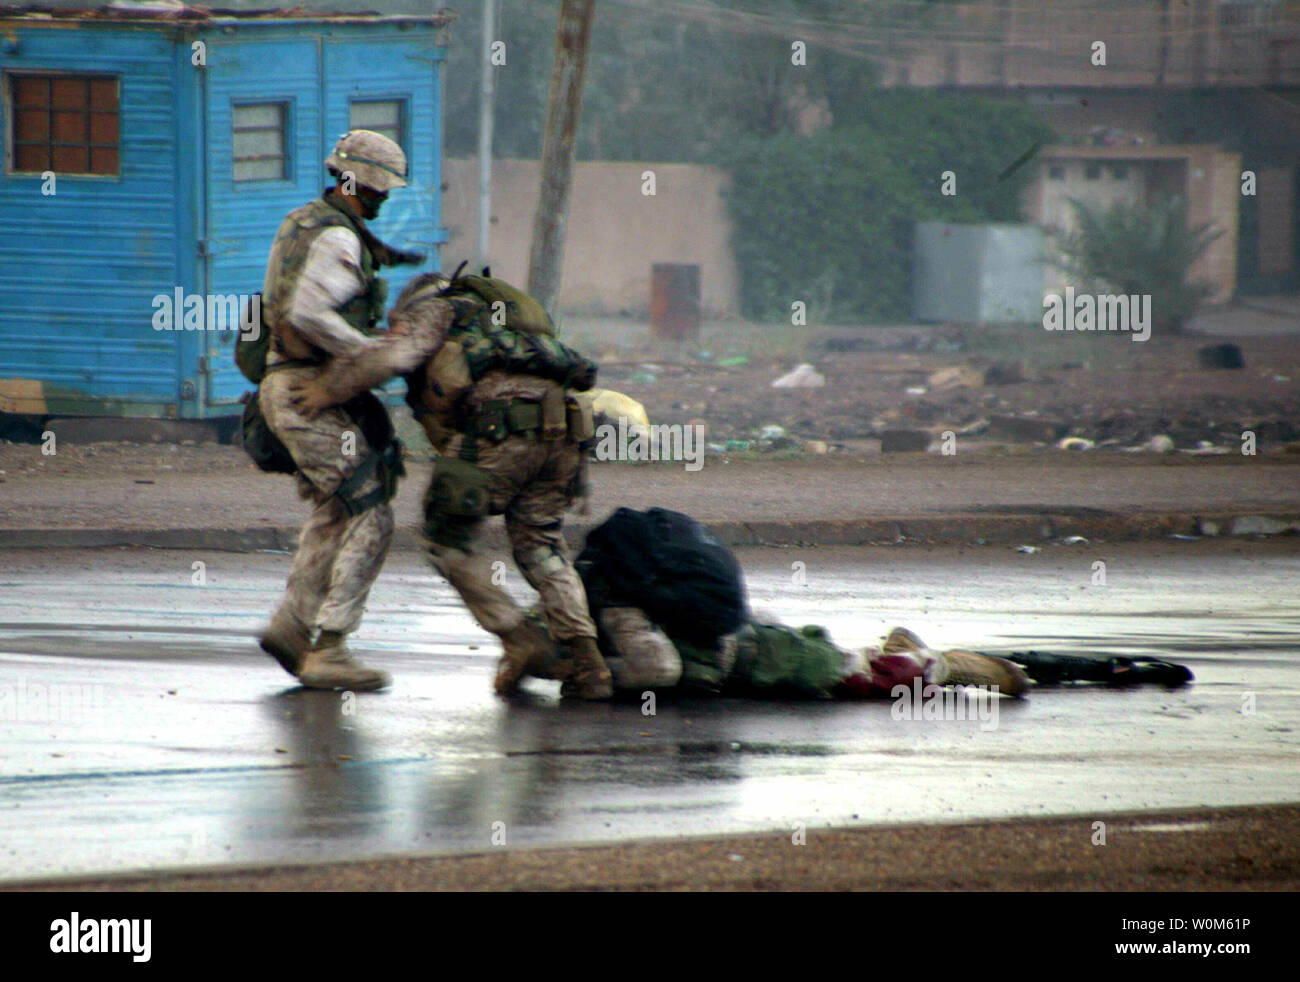 Gunnery Sgt. Ryan P. Shane (C), Company B, 1st Battalion 8th Marine Regiment, Regimental Combat Team 7, pulls a fatally wounded Marine from the battle in Fallujah, Iraq on November 5, 2004. Seconds later Shane was also wounded by enemy fire.  Photo released December 21.  (UPI Photo/Joel Chaverri/U.S. Marines) Stock Photo